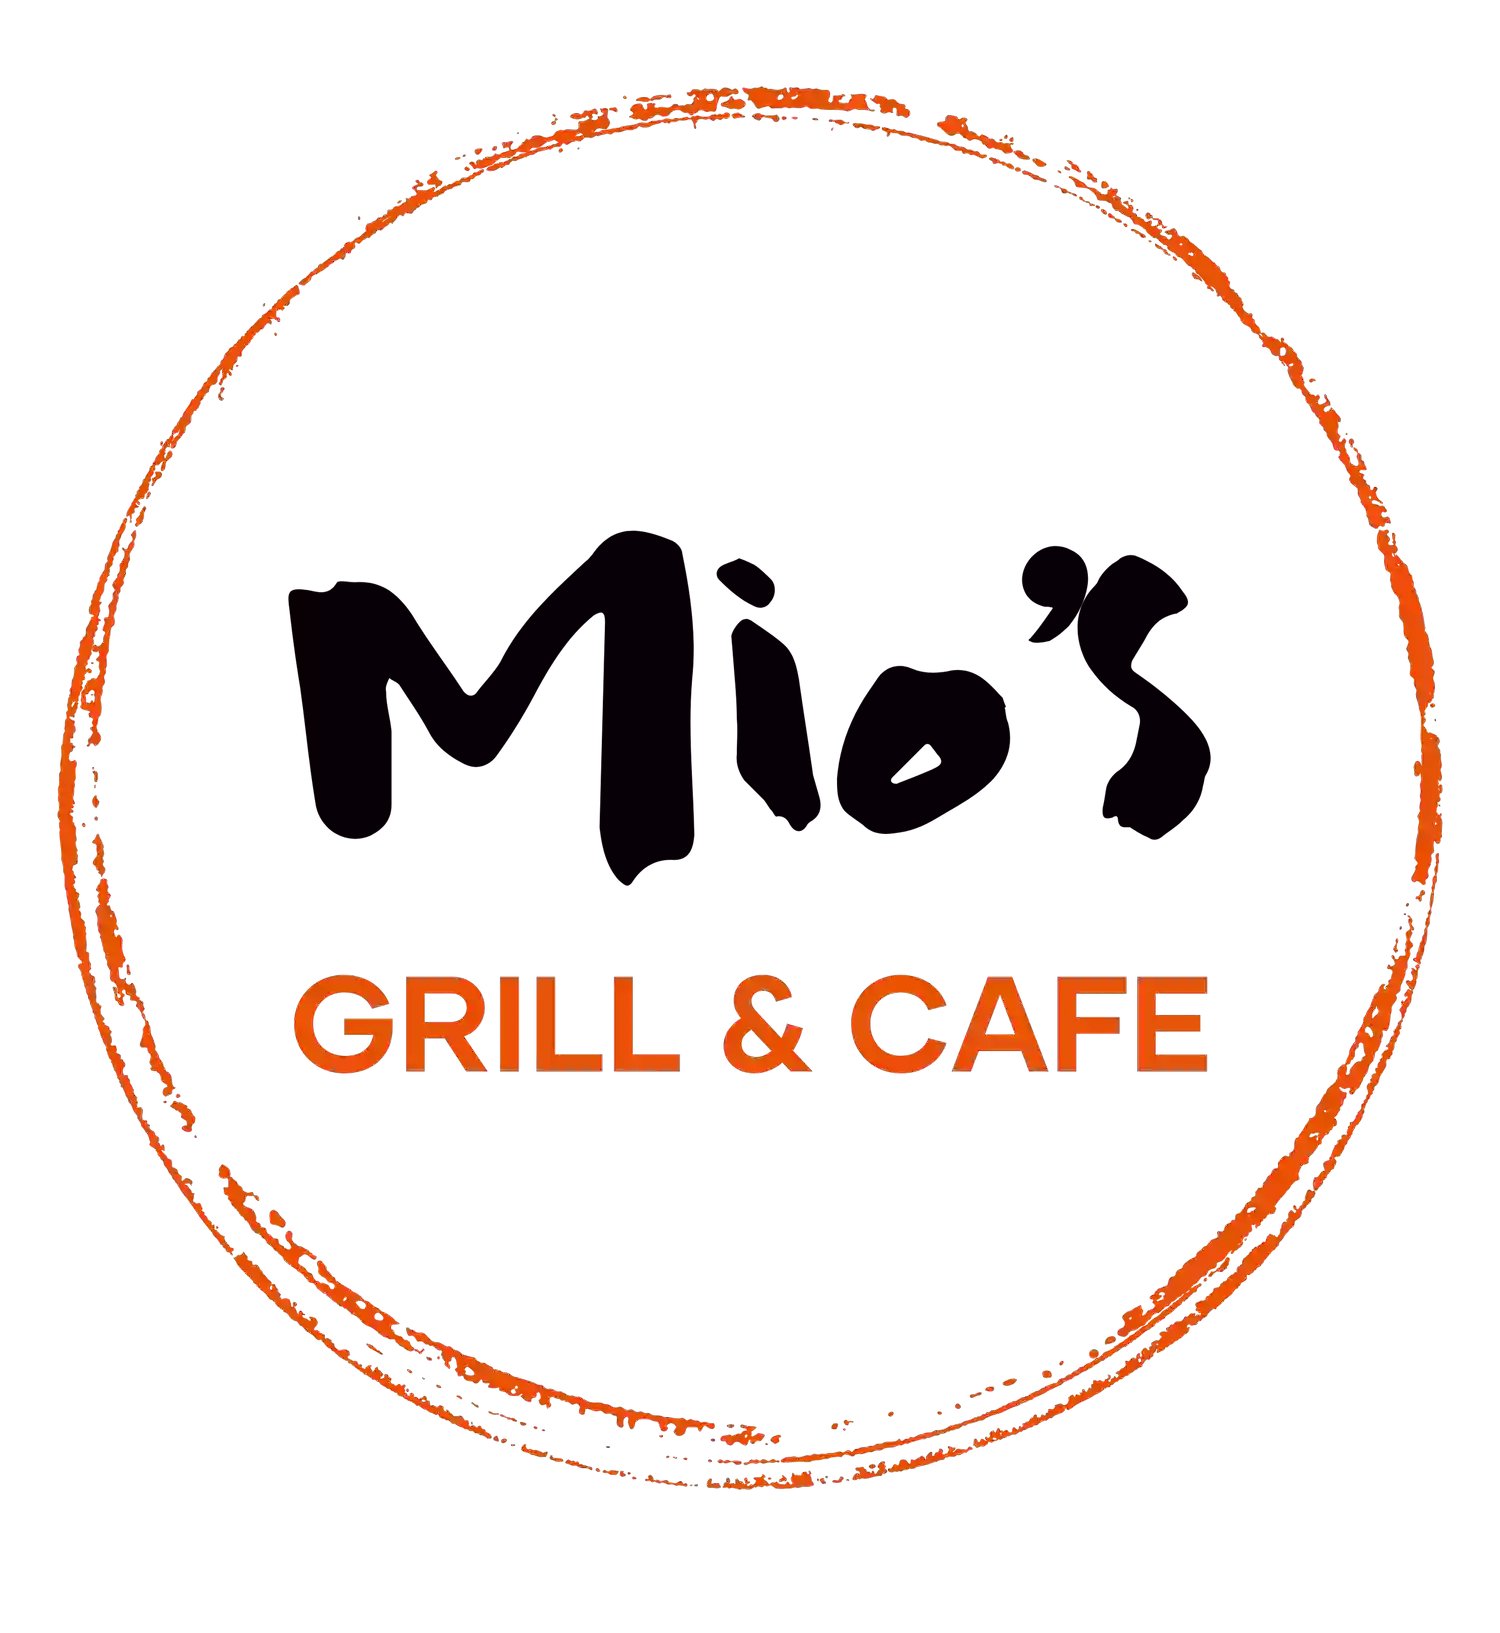 Mio’s Grill & Cafe